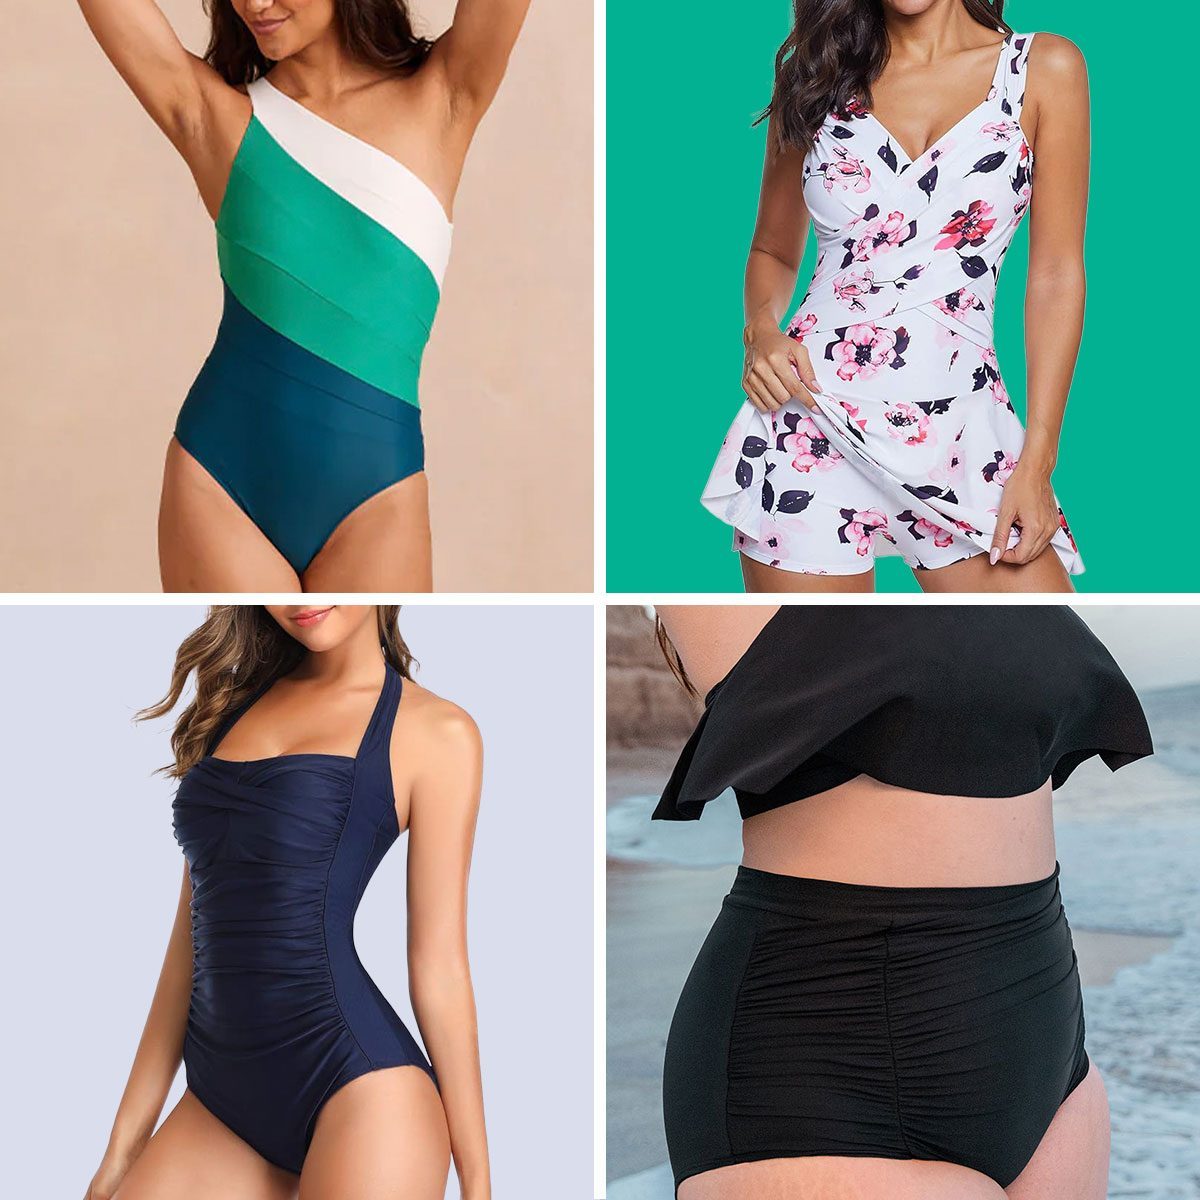 The 8 Best Tummy Control Swimsuits For Total Confidence